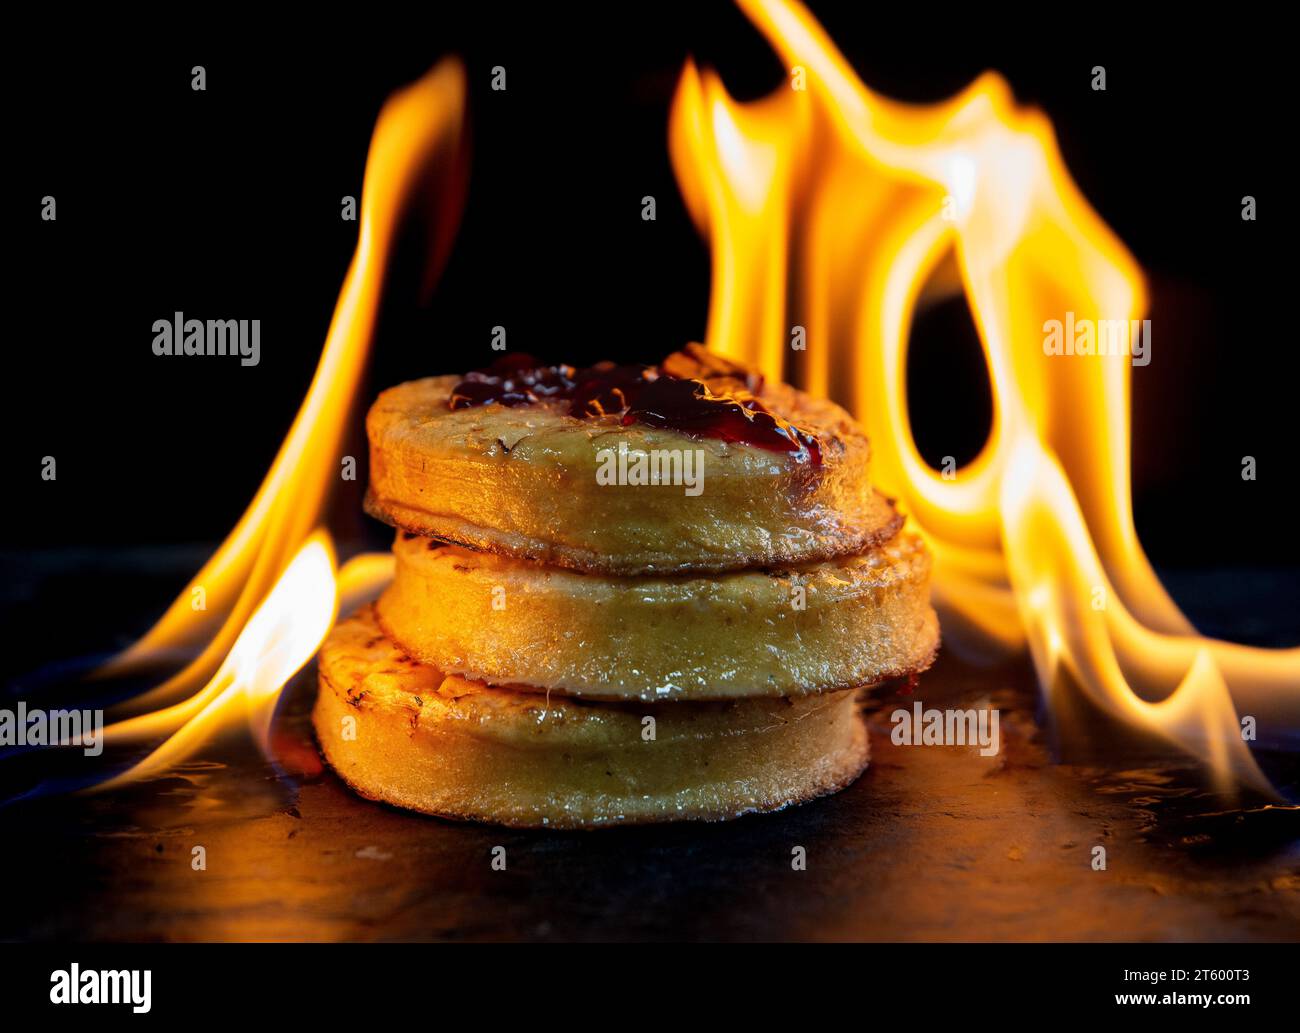 https://c8.alamy.com/comp/2T600T3/a-stack-of-crumpets-with-flames-around-the-outside-2T600T3.jpg